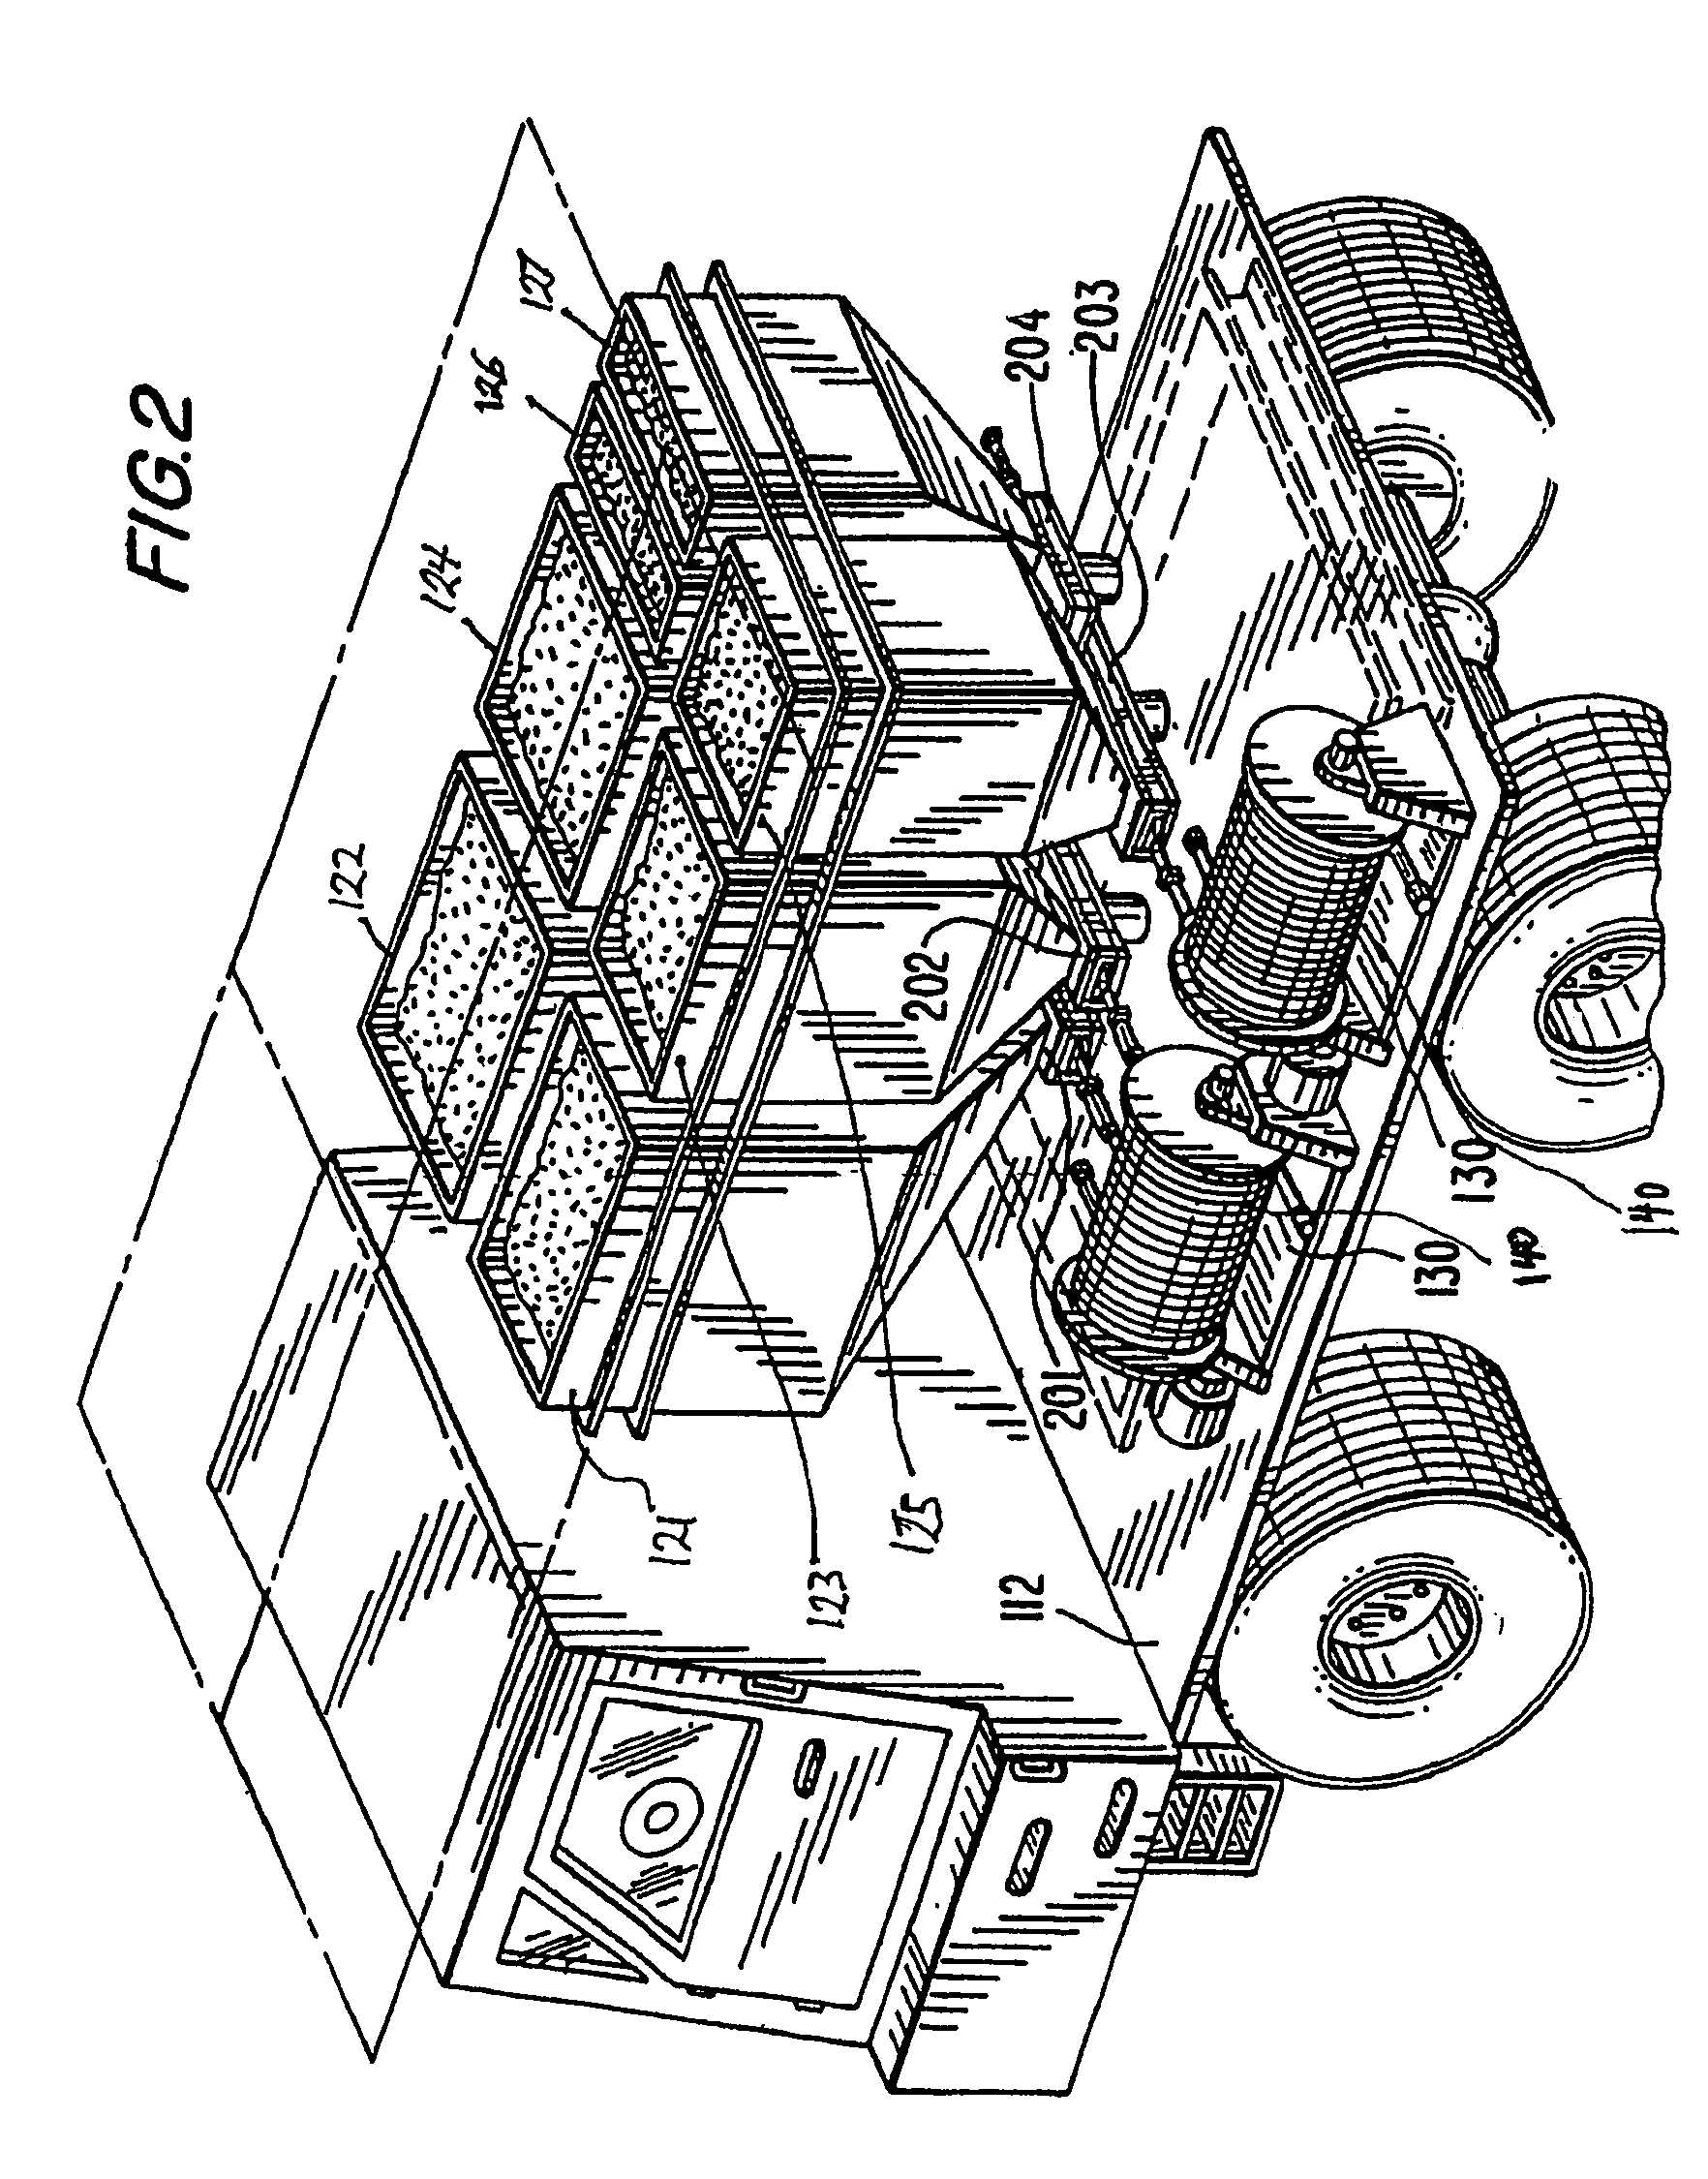 Method and devices for dispensing fluids